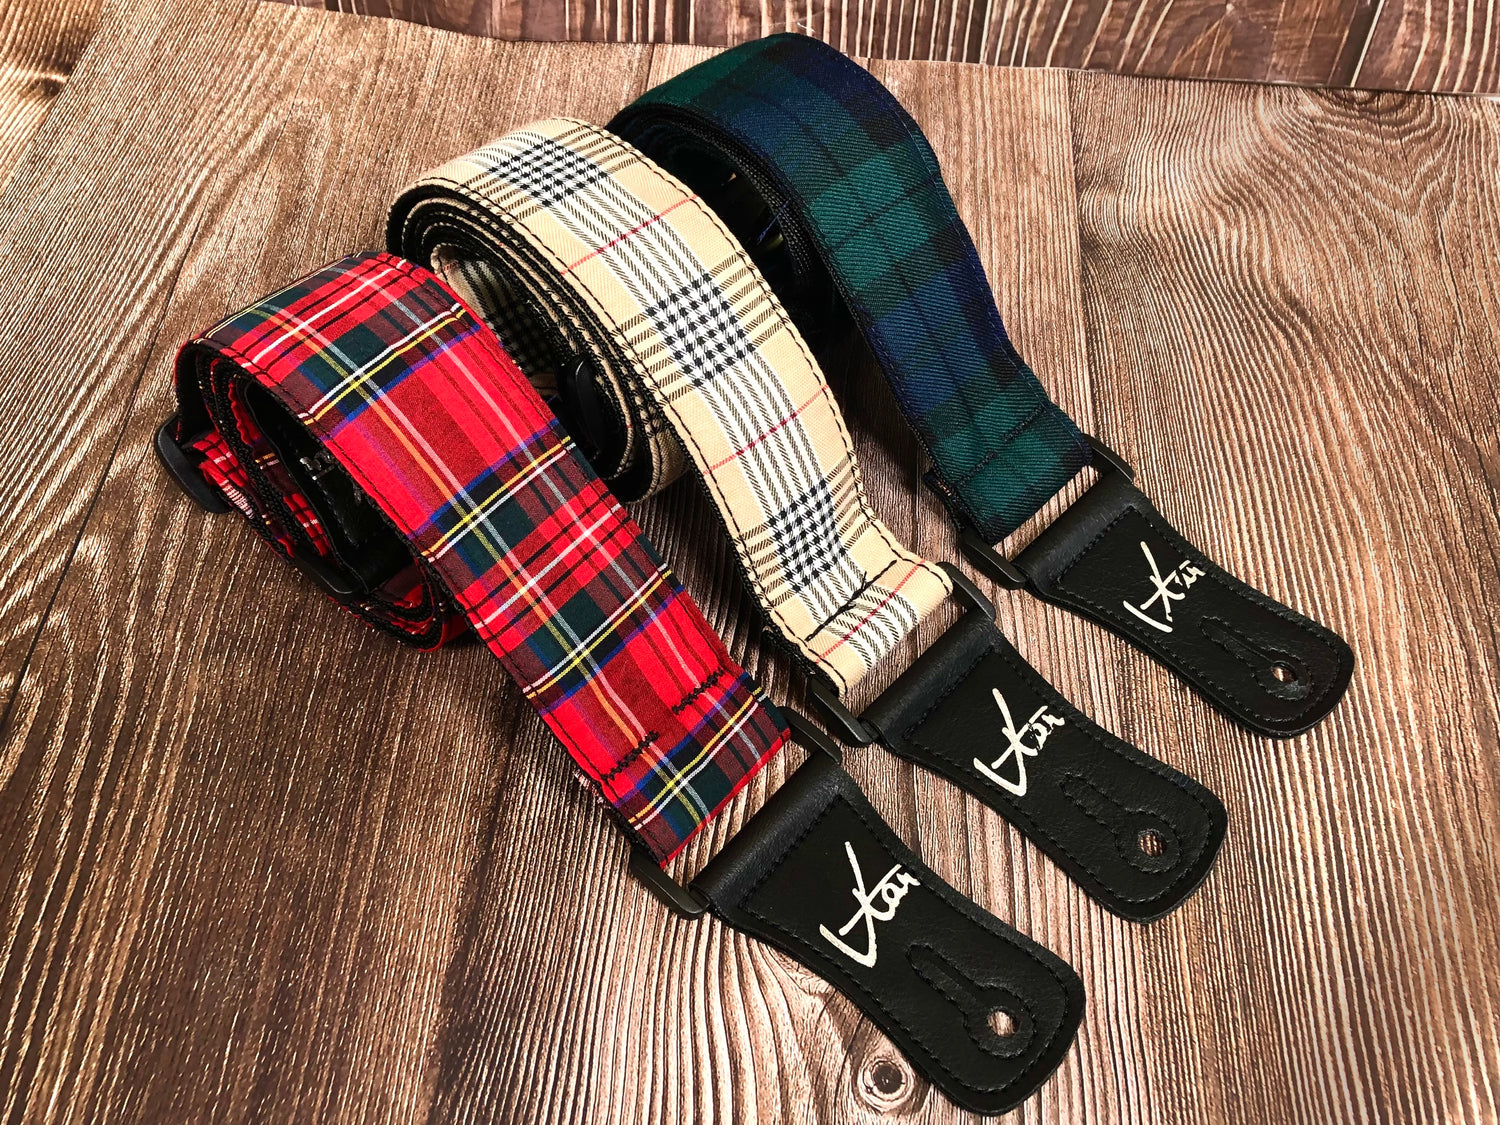 The Tartan Collection